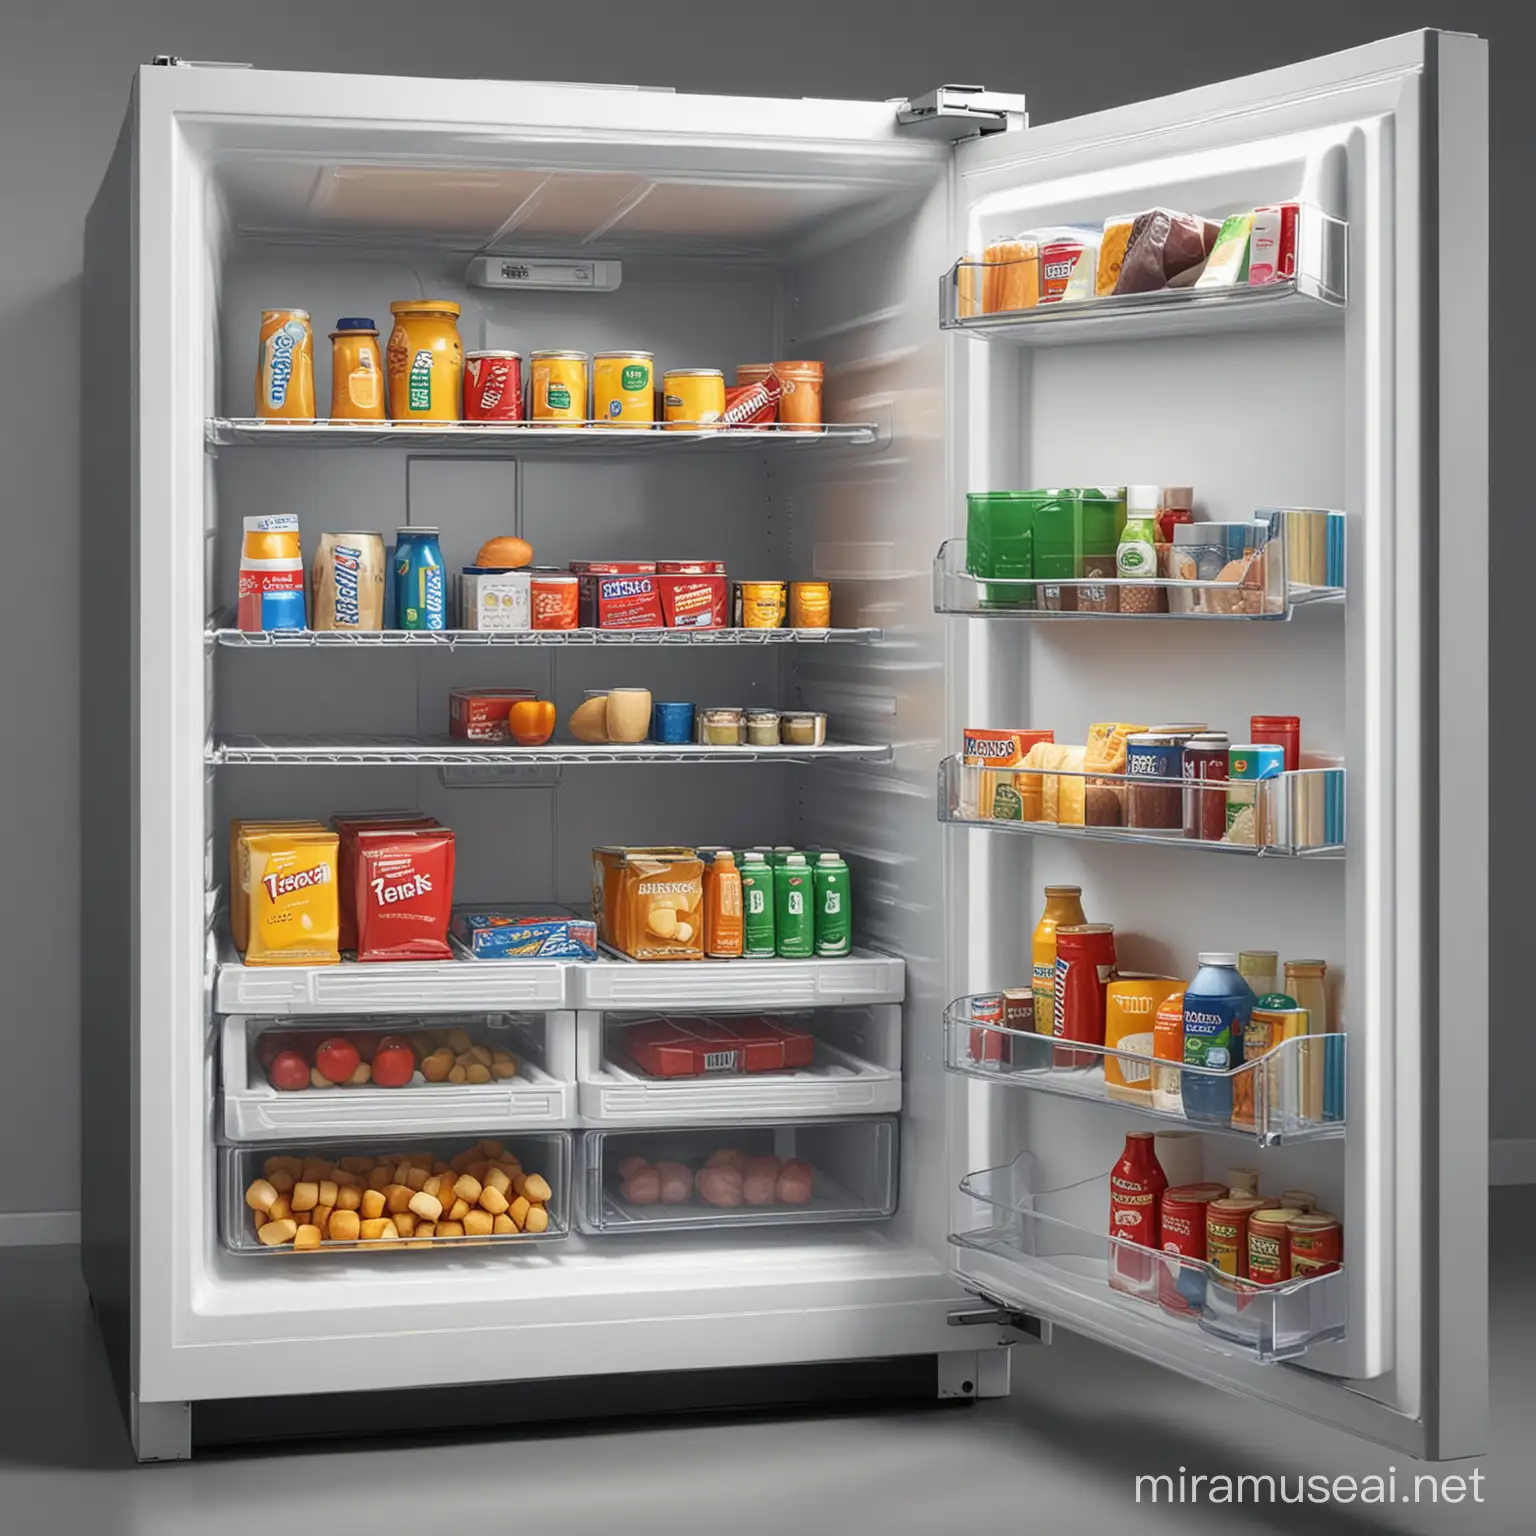 Kitchen with Photorealistic TetrisStyle Food Packages in Open Refrigerator